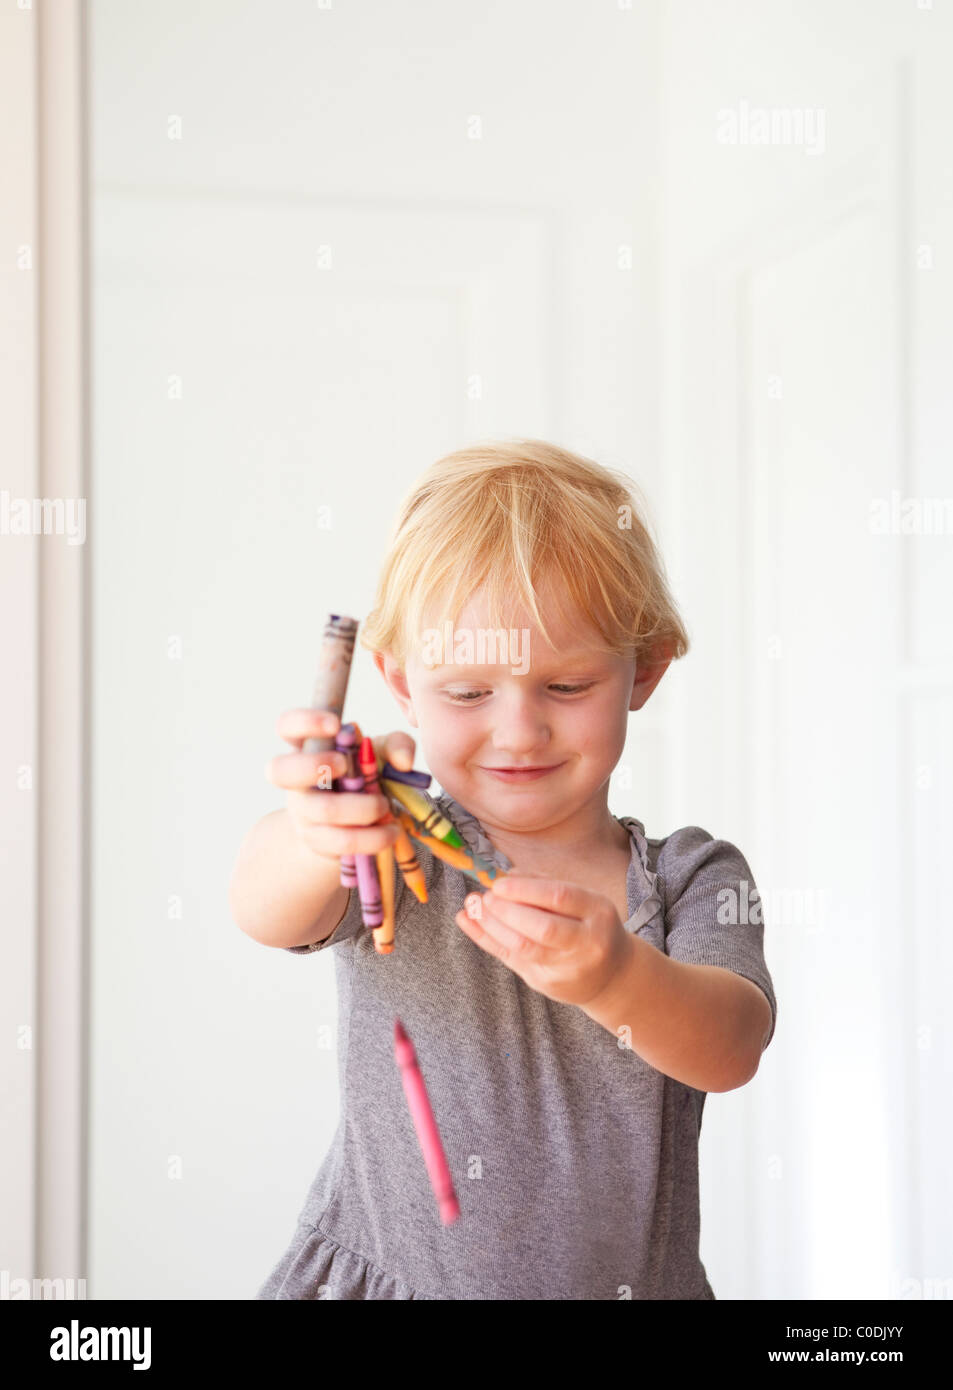 Little girl playing with crayons Stock Photo